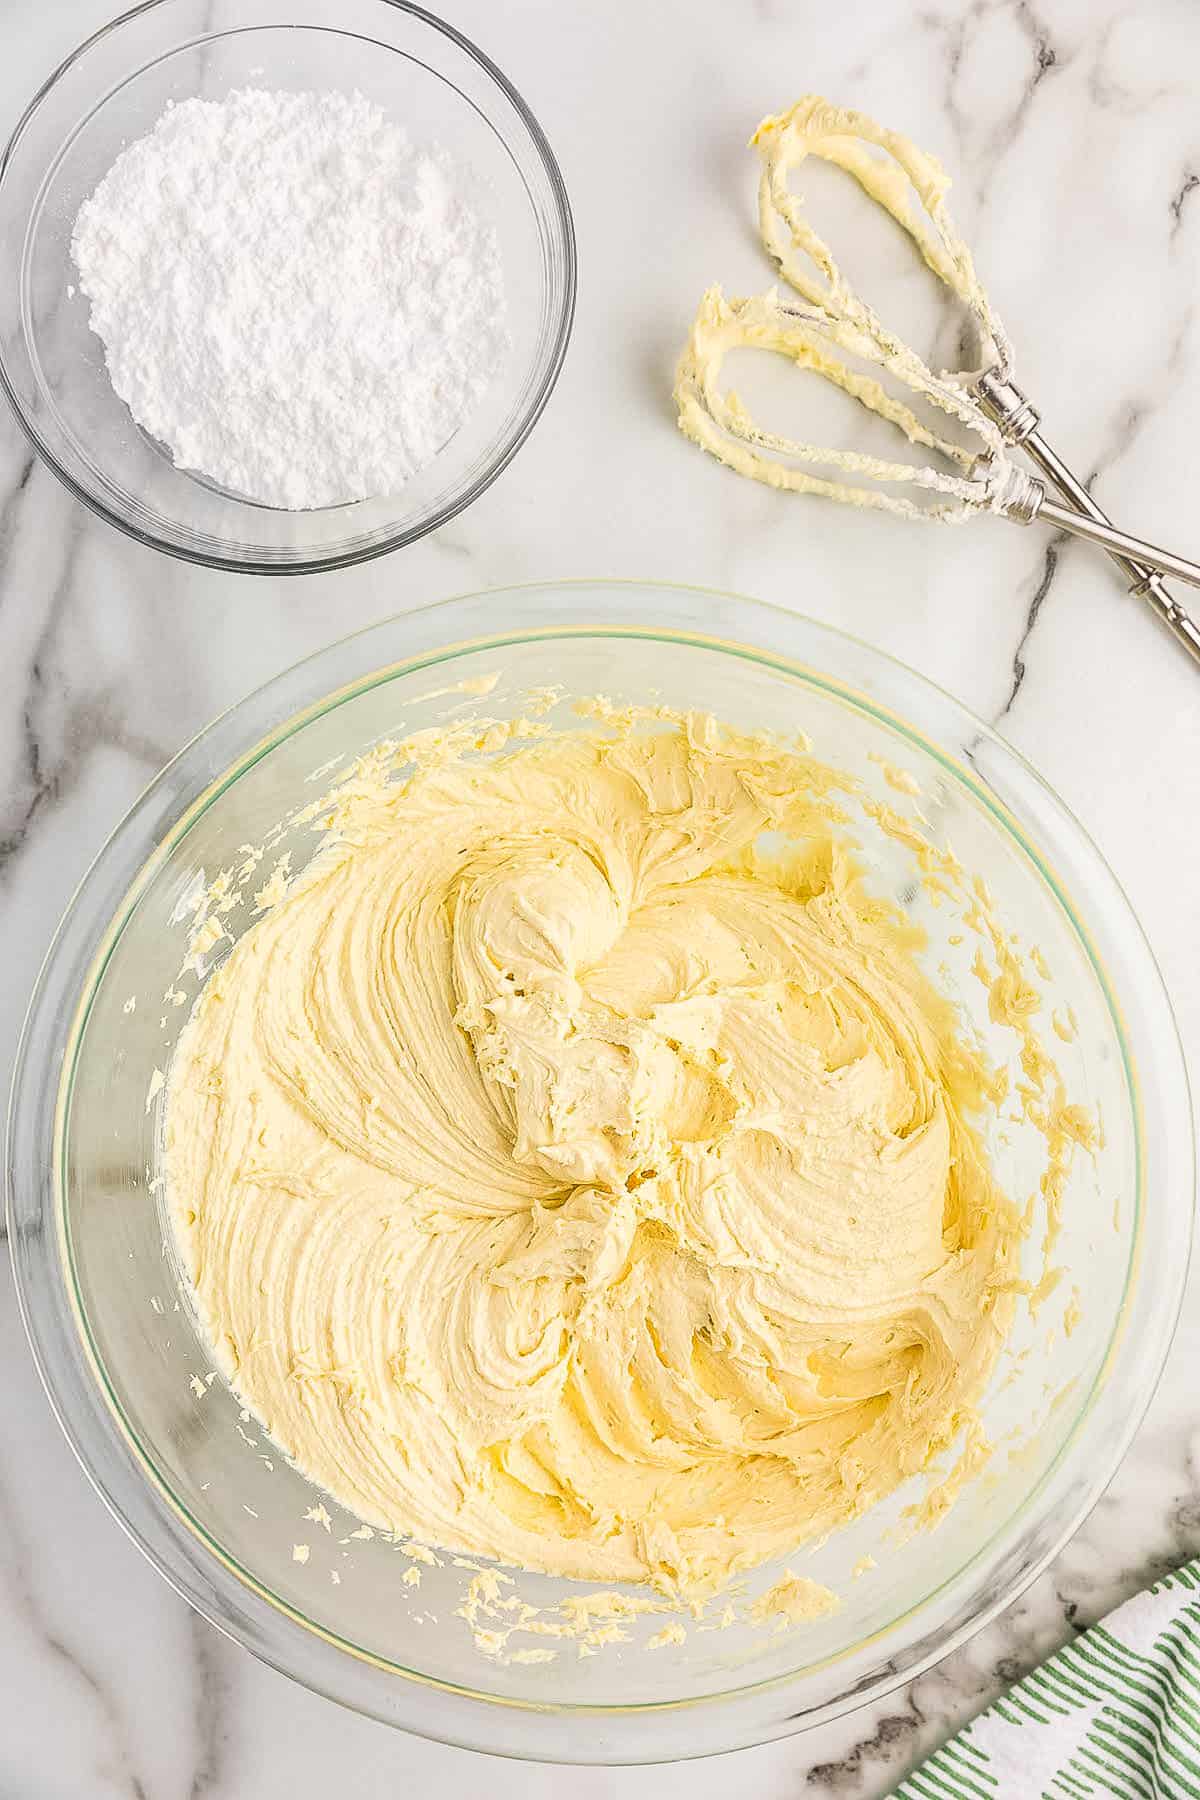 Bowl with lemon cool whip cookie batter